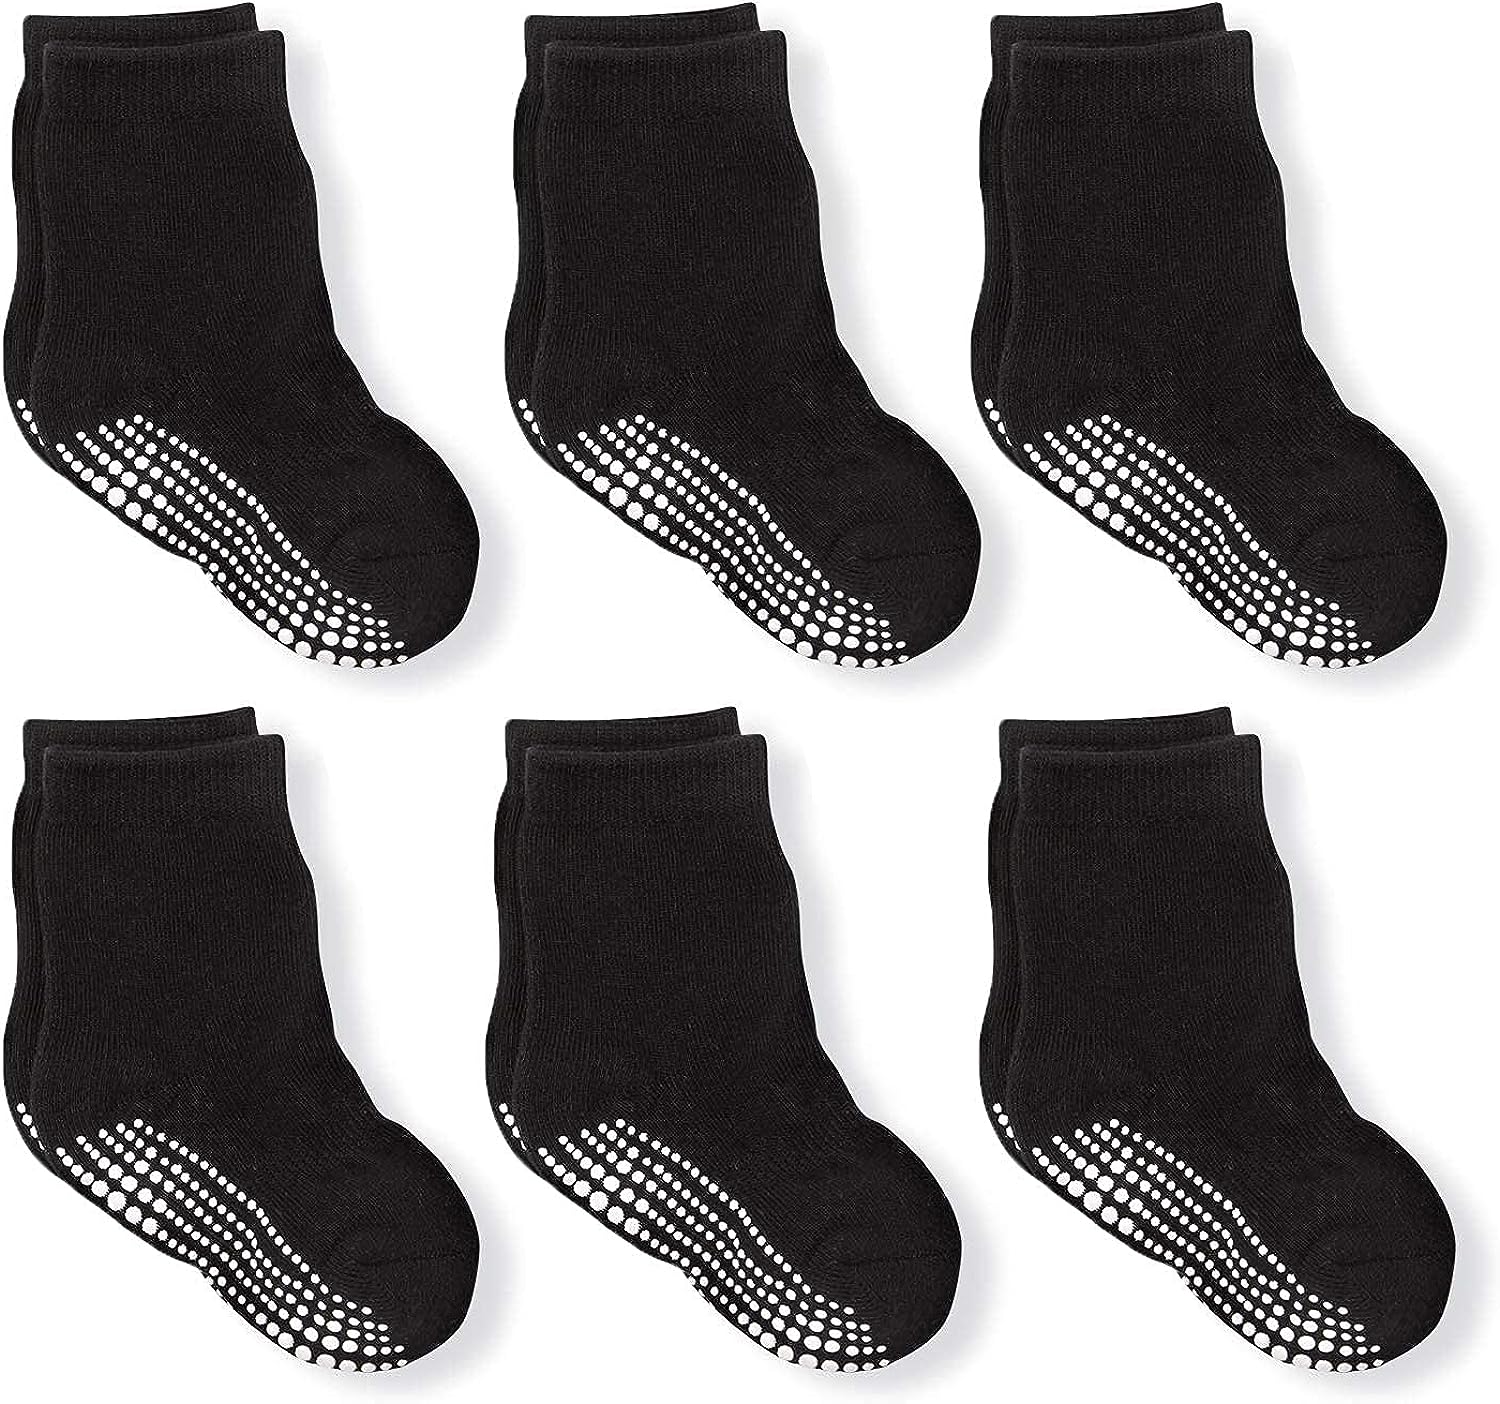 LA Active LA AcTIVE Non Slip grip Ankle Boys and girls Socks with Non Skid  for Babies Toddlers and Kids Back to School